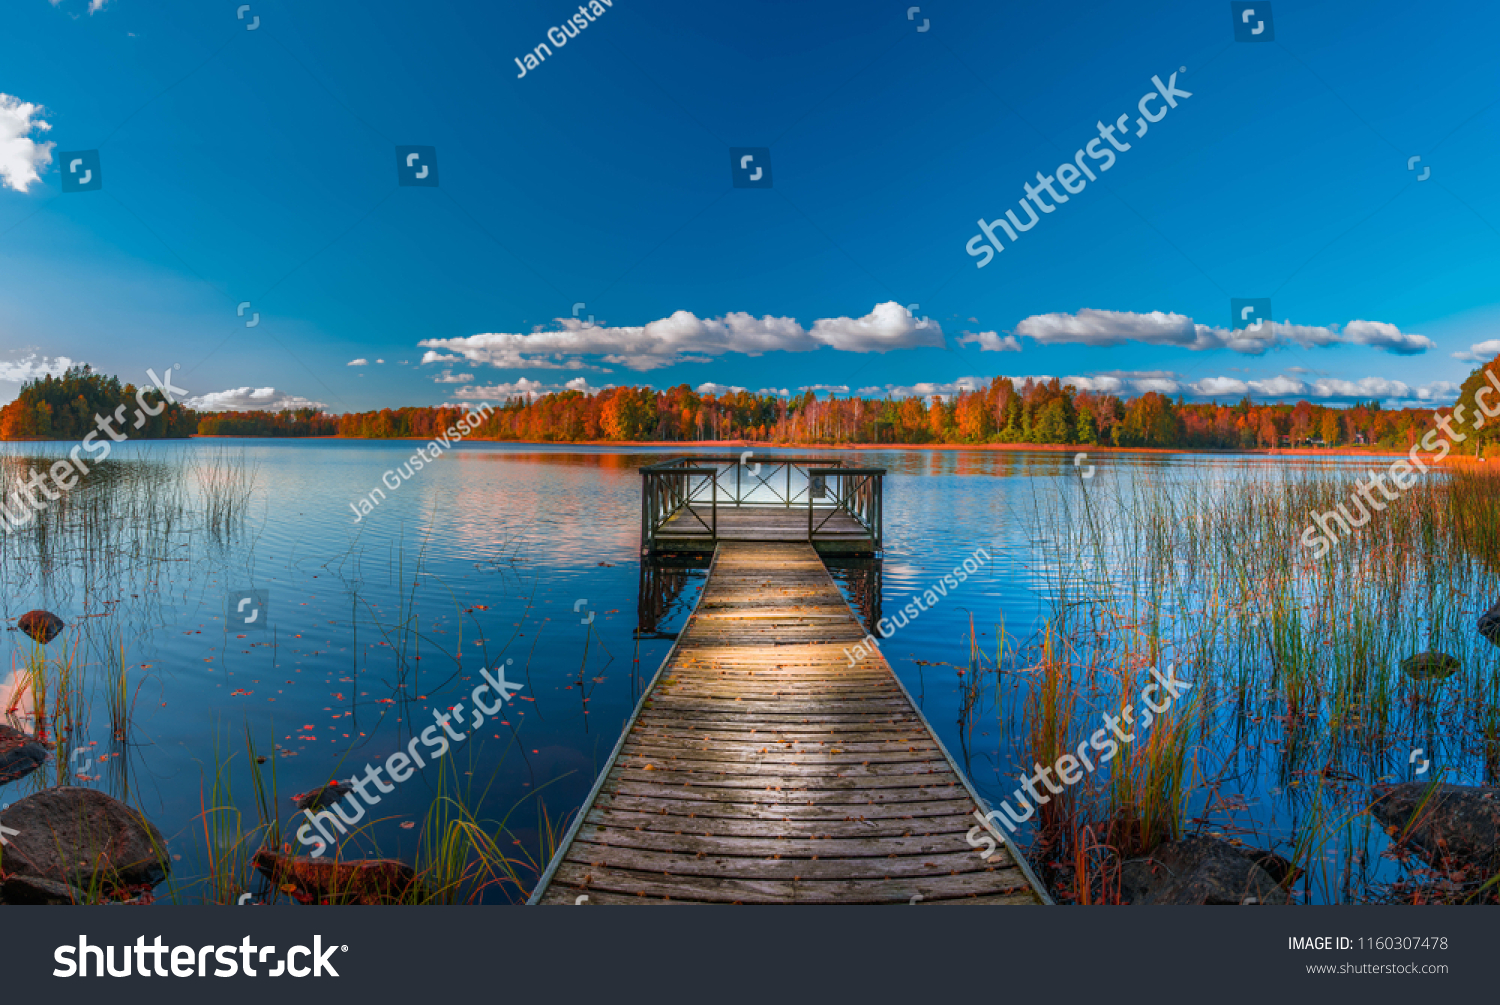 45,815 Fishing dock background Images, Stock Photos & Vectors ...